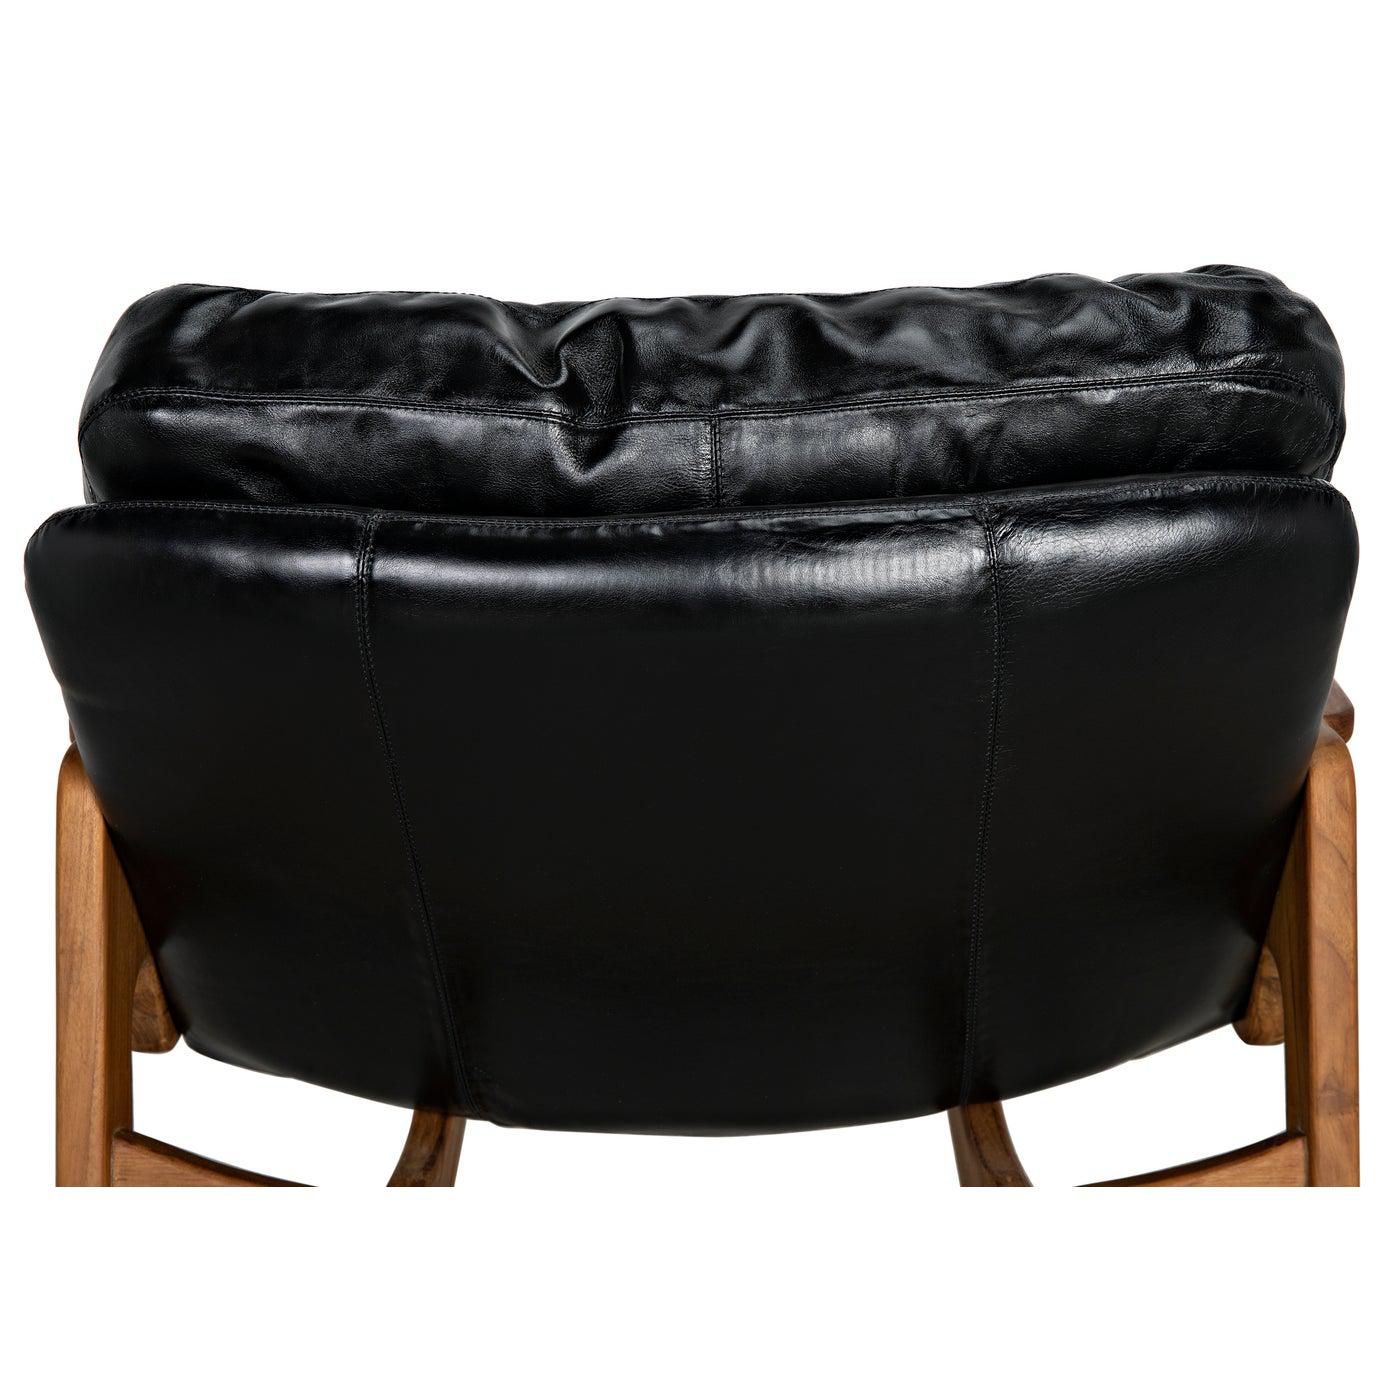 Dilon Chair with Leather